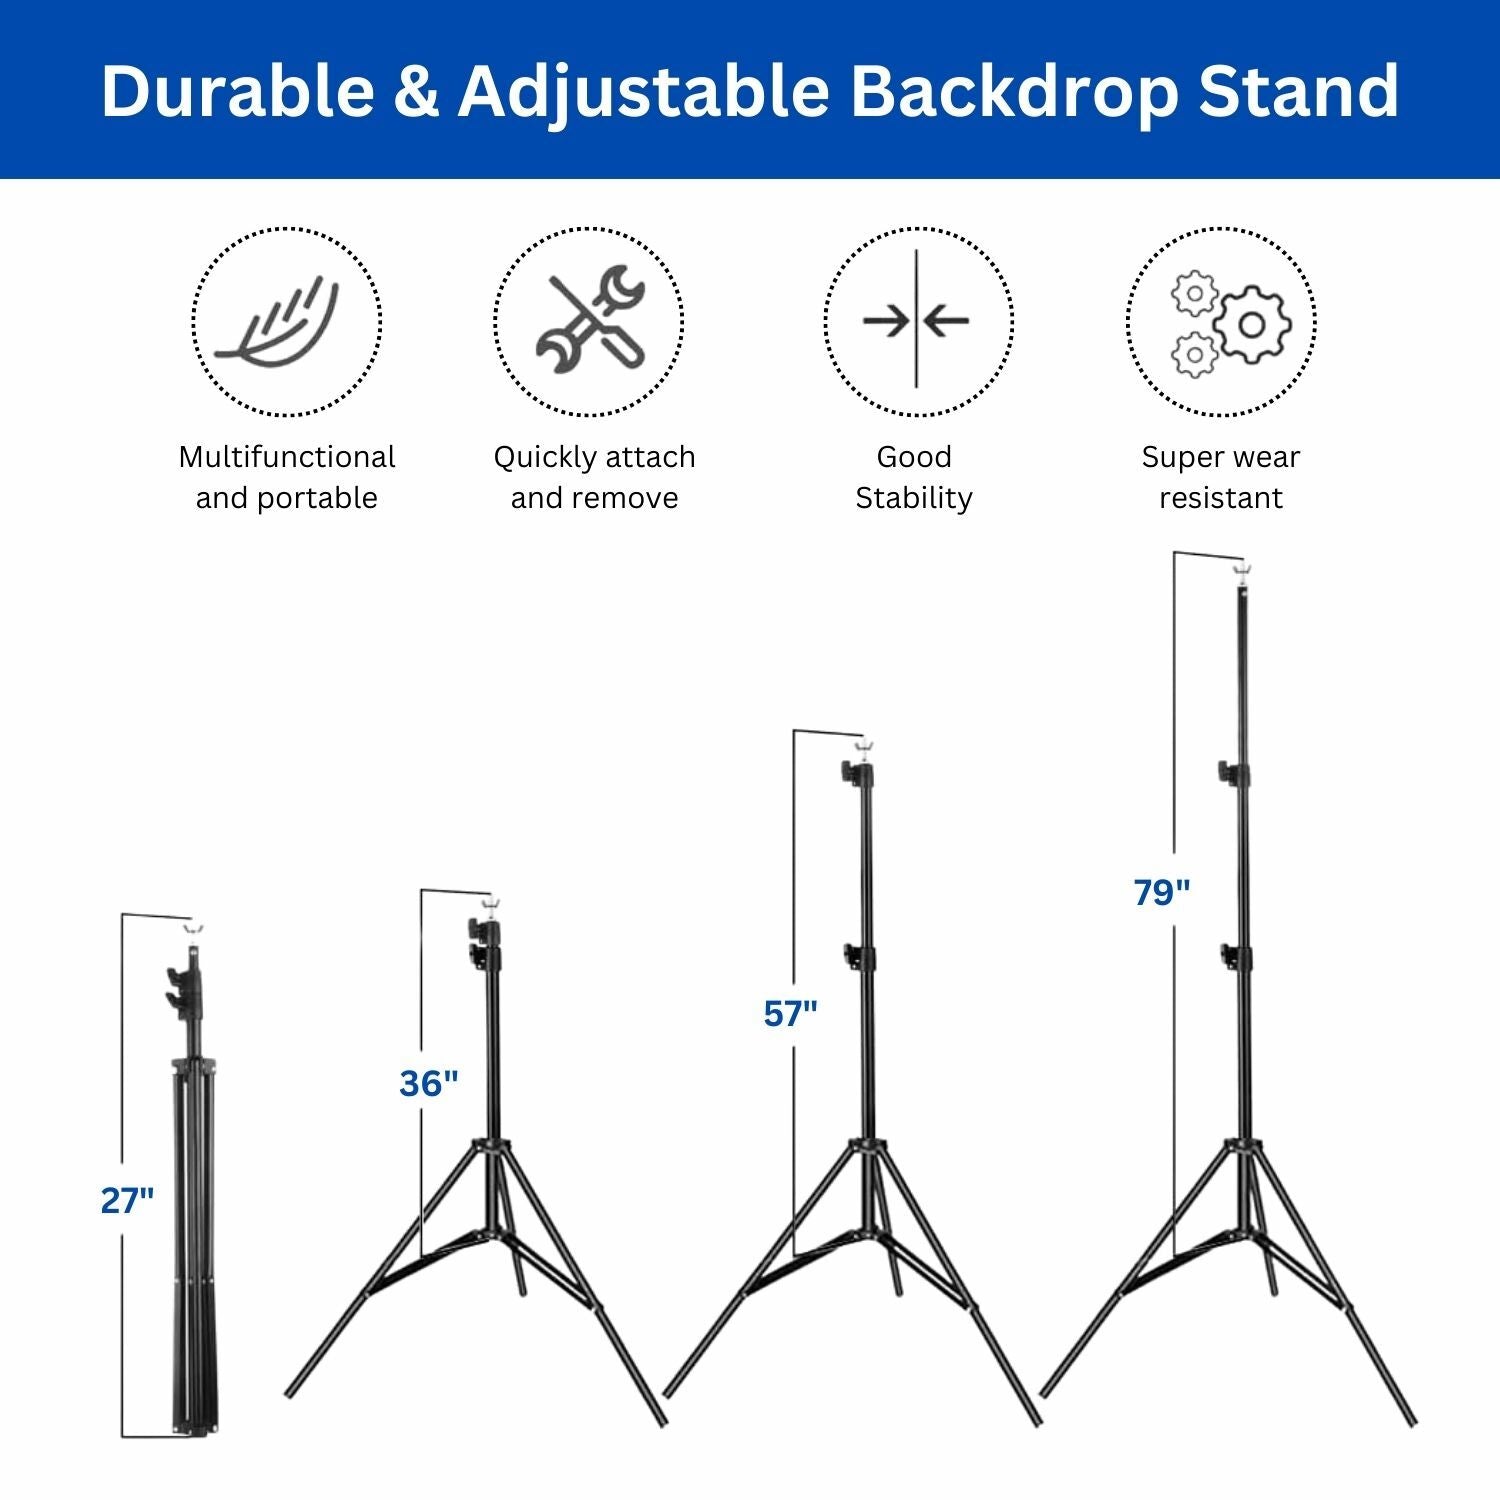 Adjustable backdrop stand with its dimension